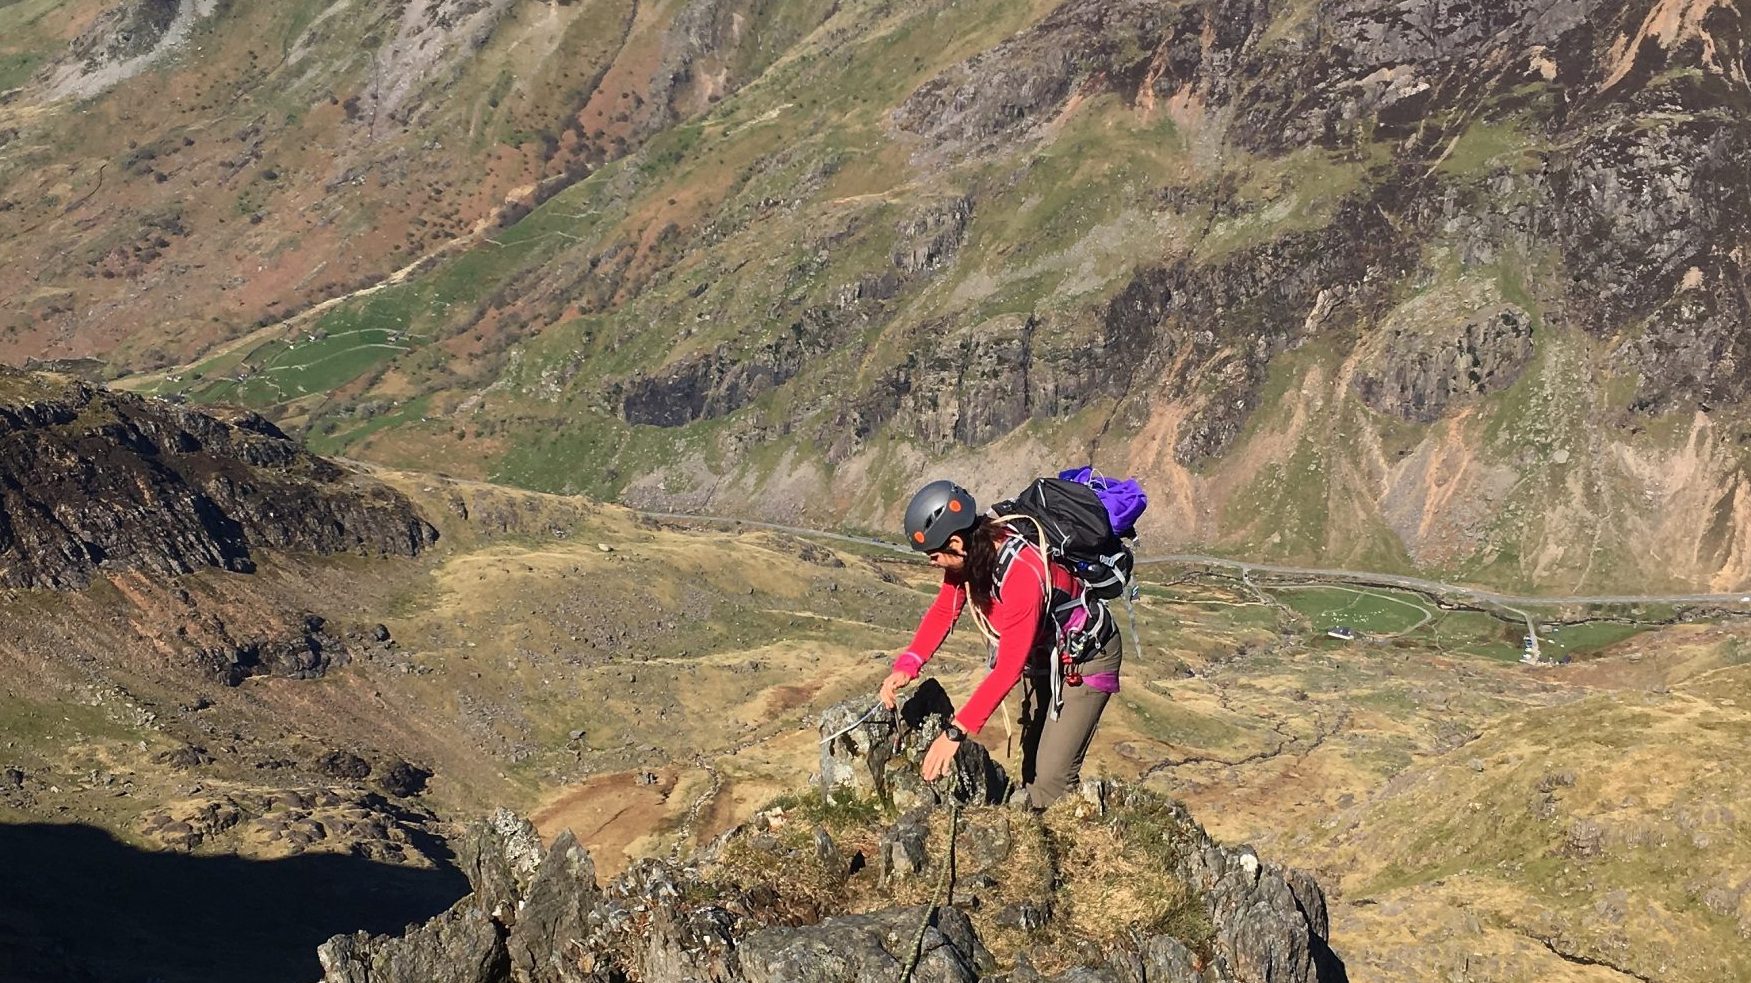 A mountaineer reaches the crest of the ridge of the Clogwyn y Person Arete with Llanberis Pass below during a summer mountaineering course in Snowdonia